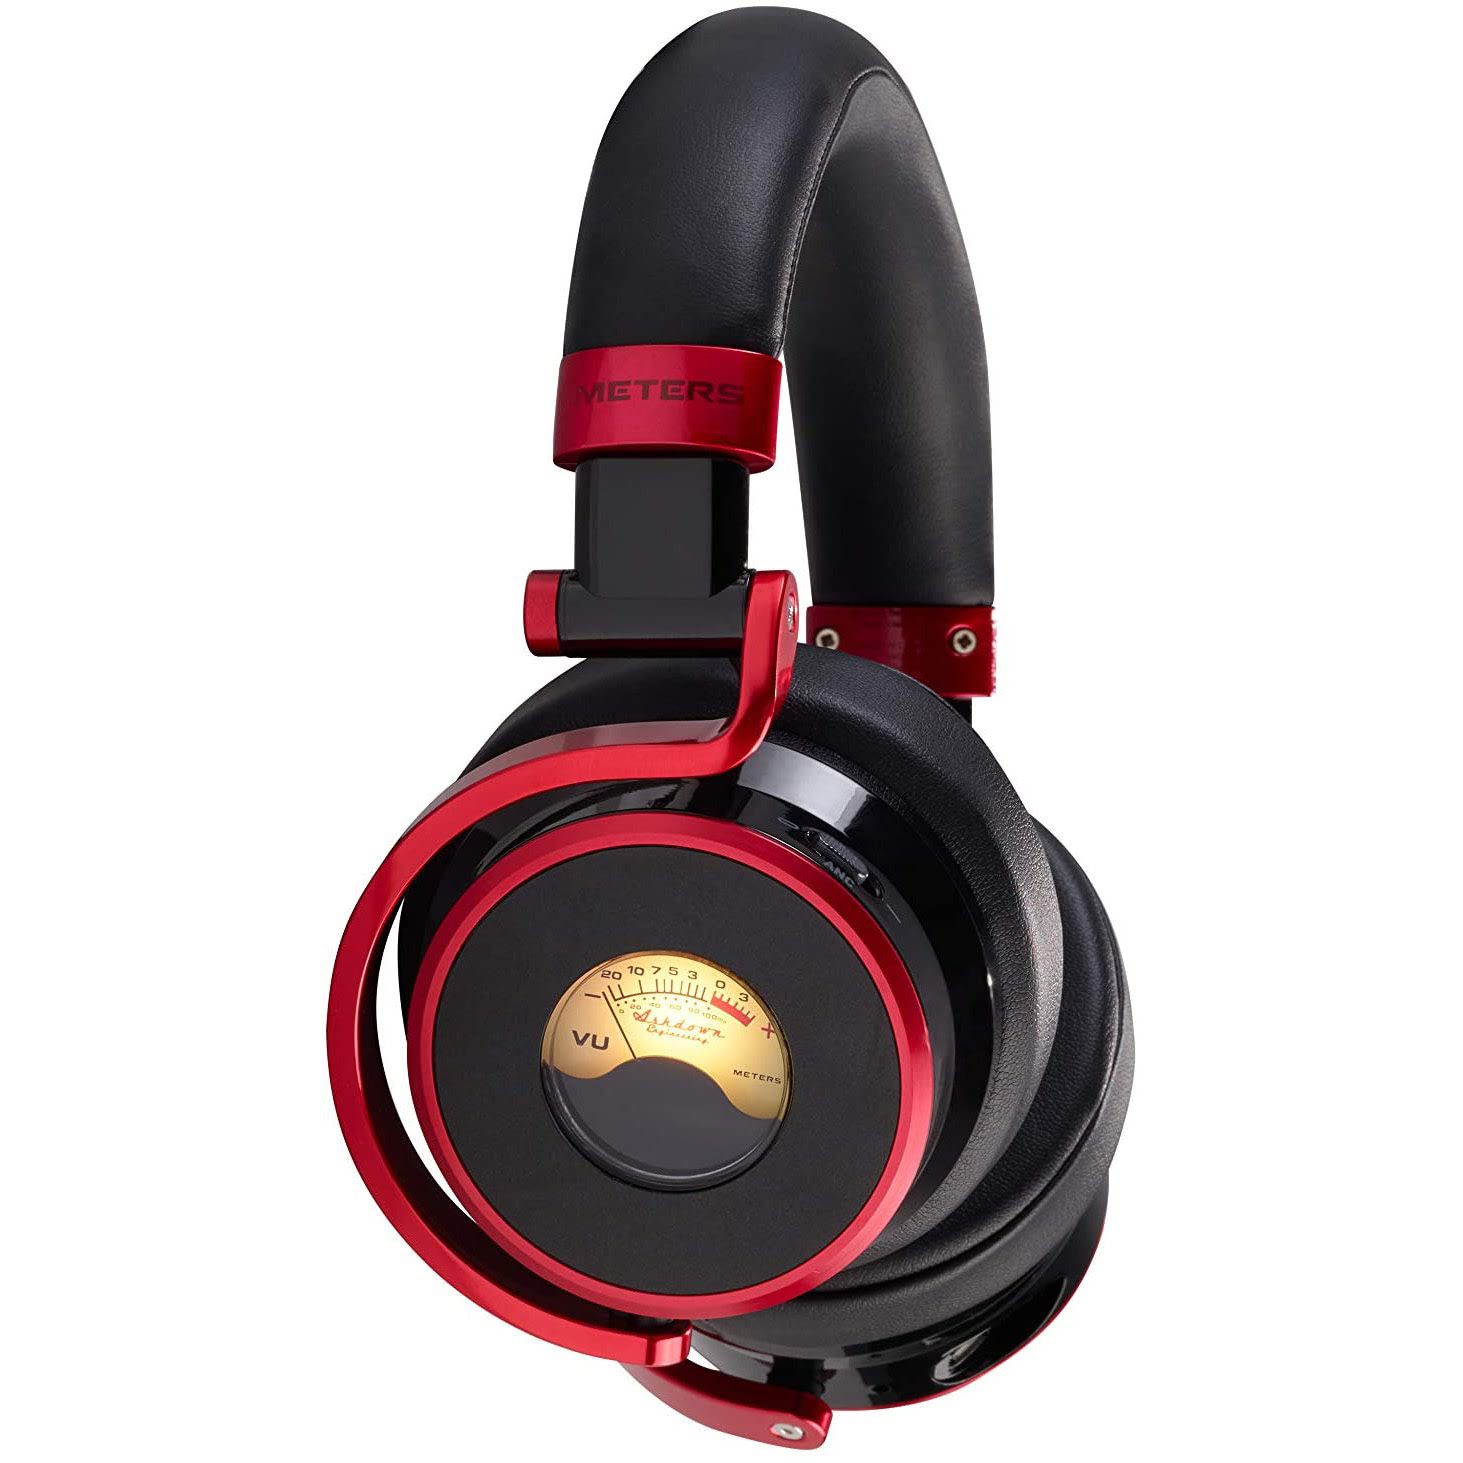 METERS OV-1-B CONNECT 7.1 Surround Rouge - Micro-casque - 0